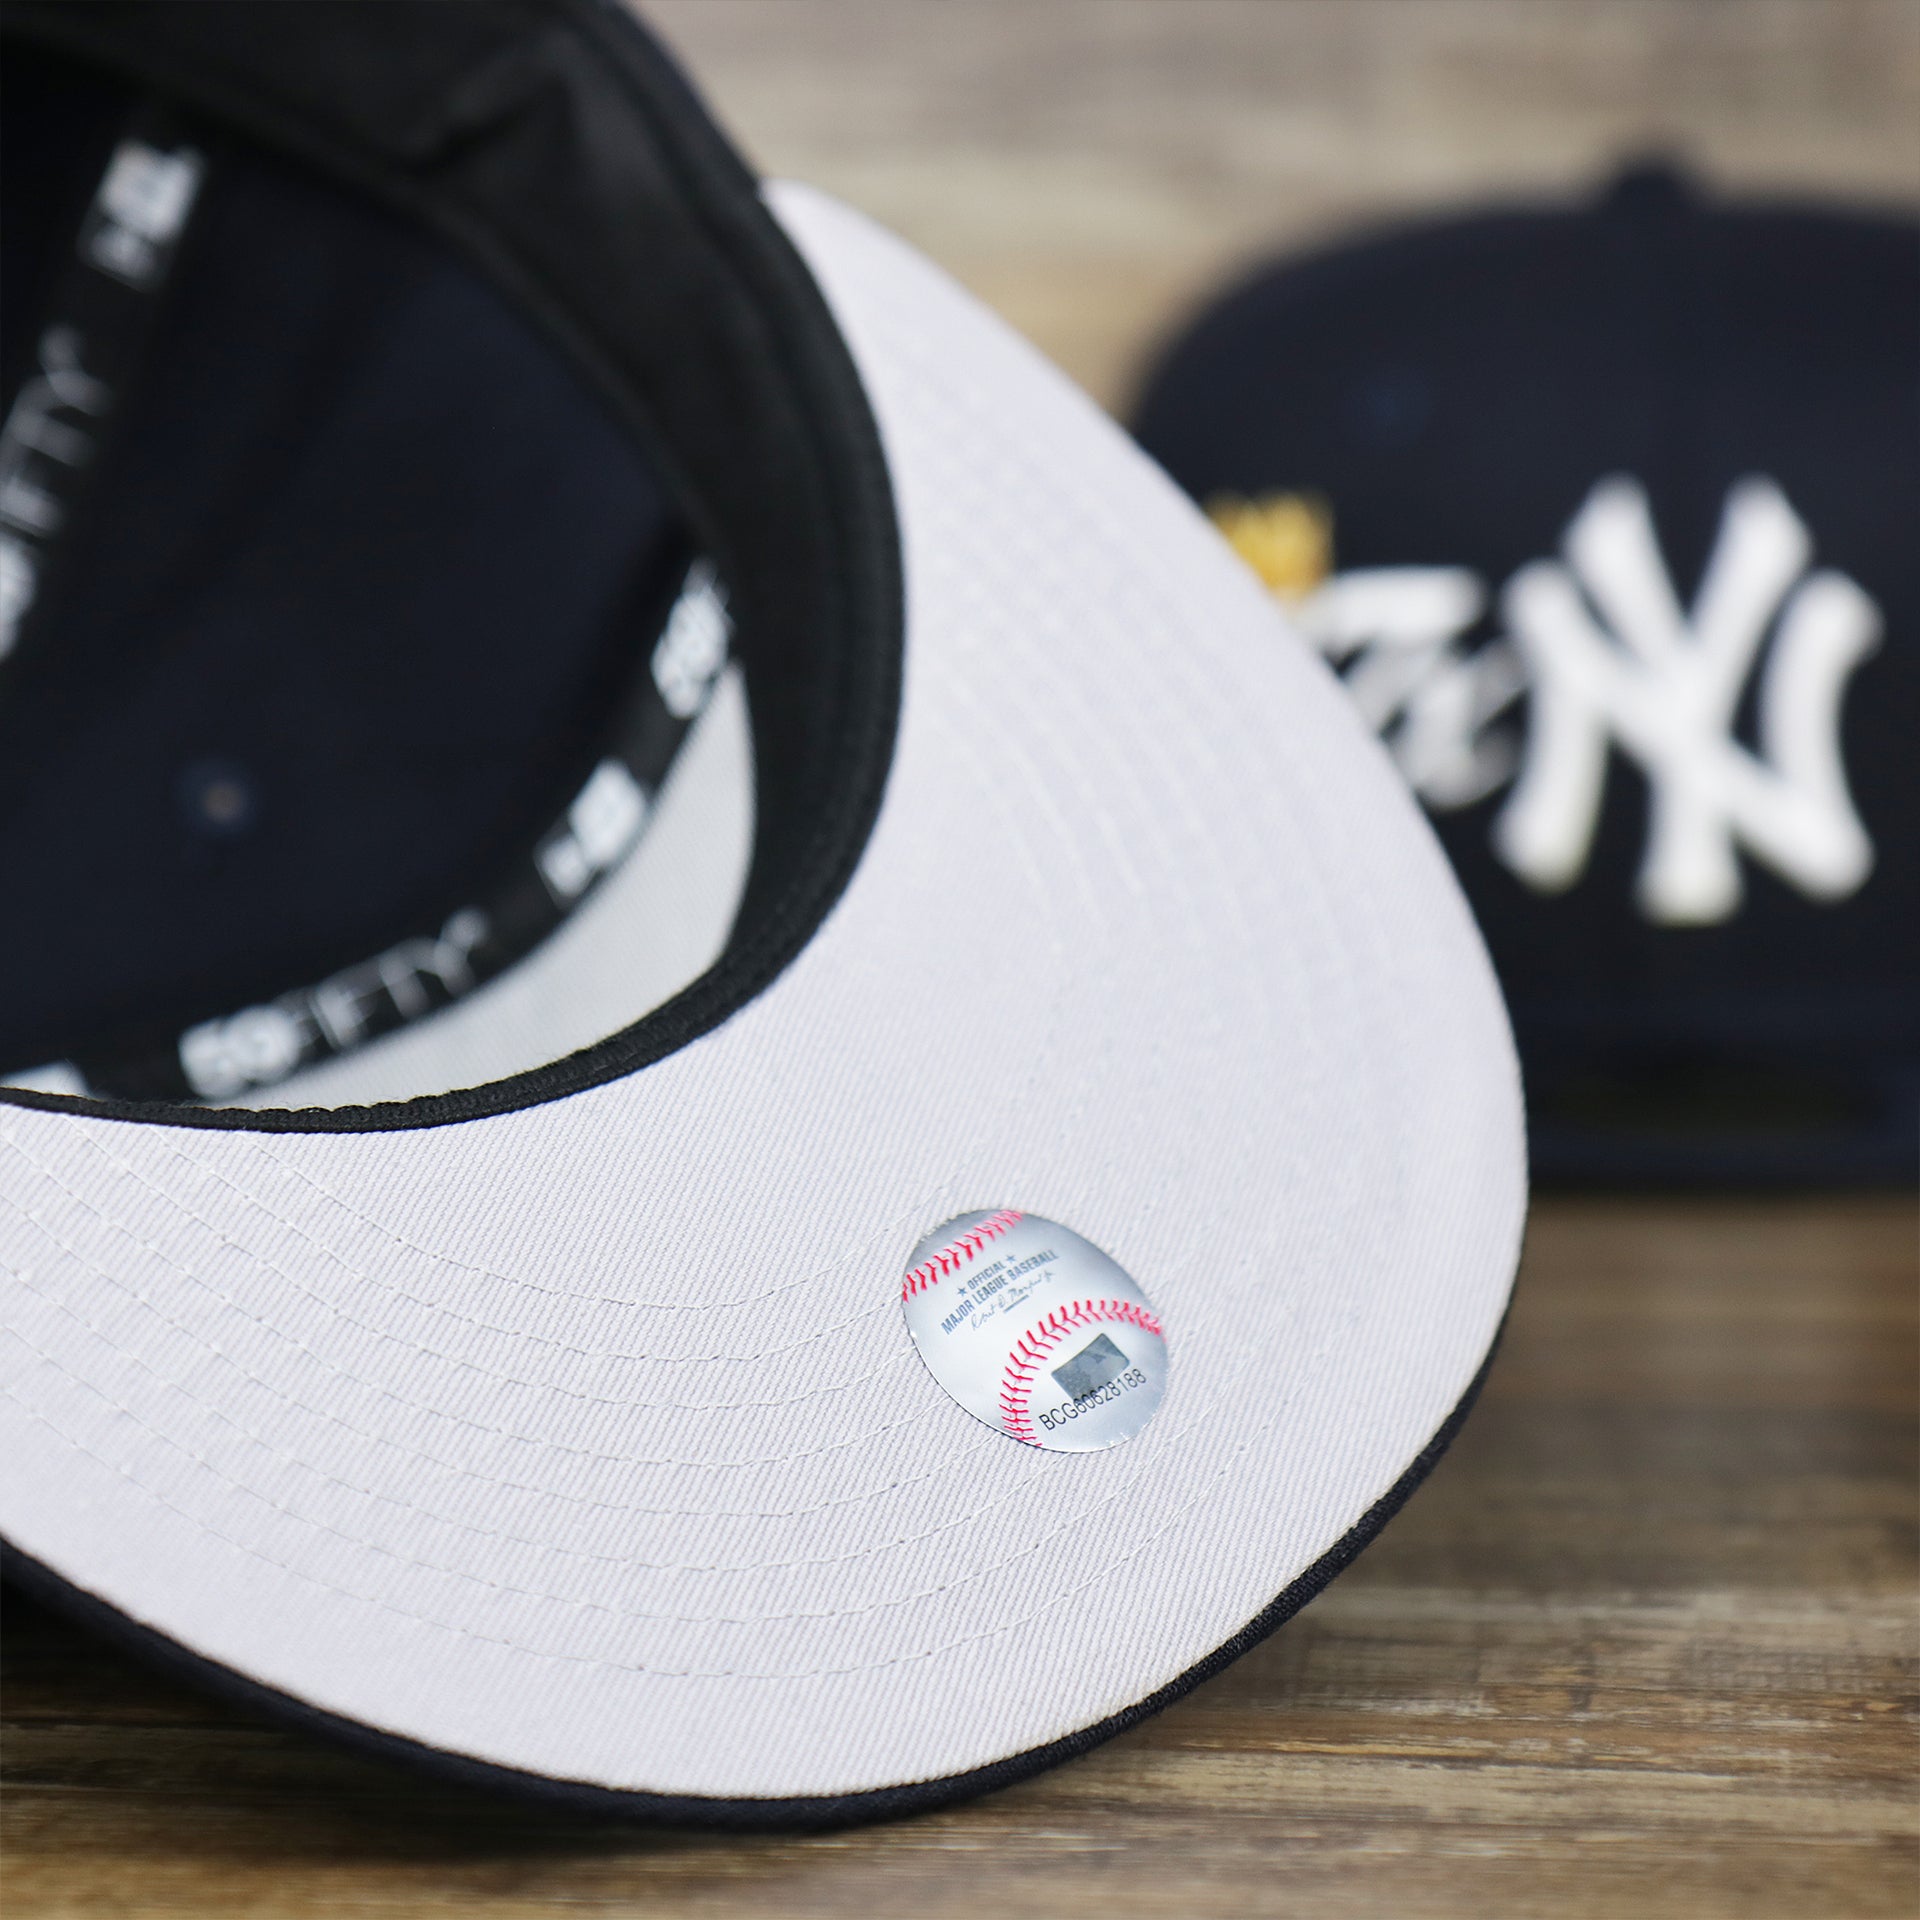 The undervisor on the New York Yankees Crown Champions Gray Bottom World Championship Wins Embroidered Fitted Cap | Navy Blue 59Fifty Cap